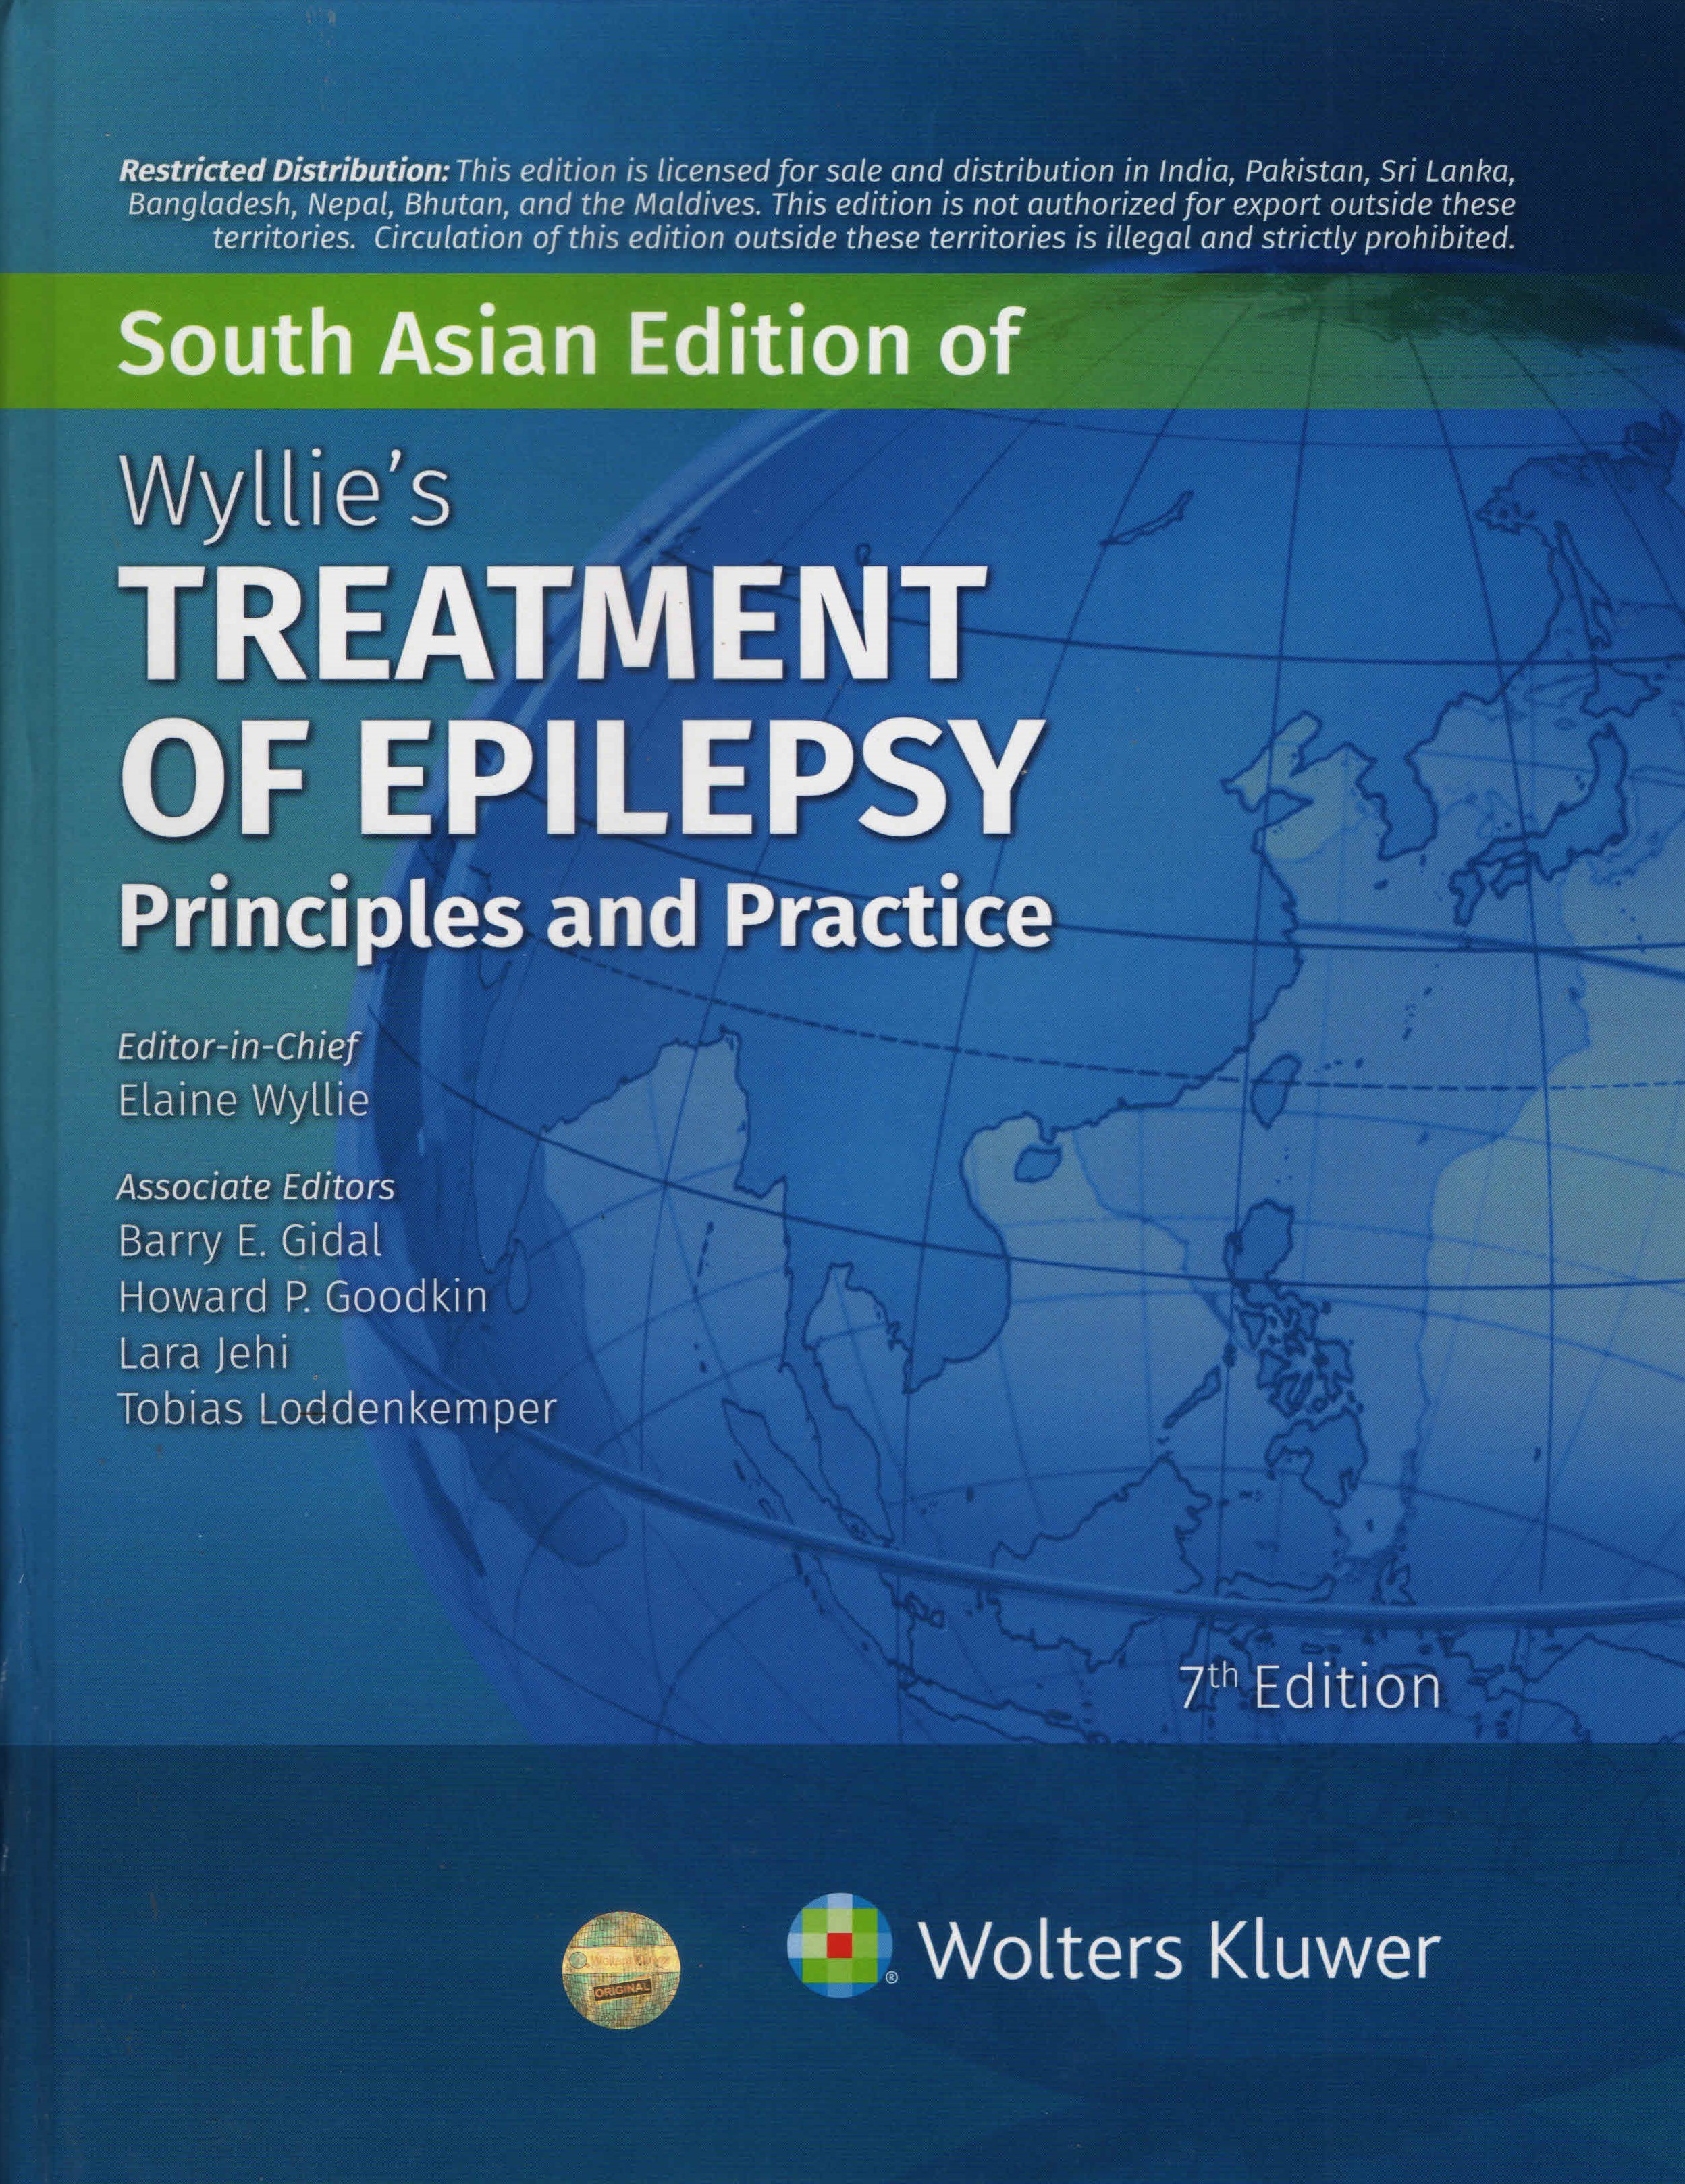 WYLLIE'S TREATMENT OF EPILEPSY: PRINCIPLES AND PRACTICE 7th Edition